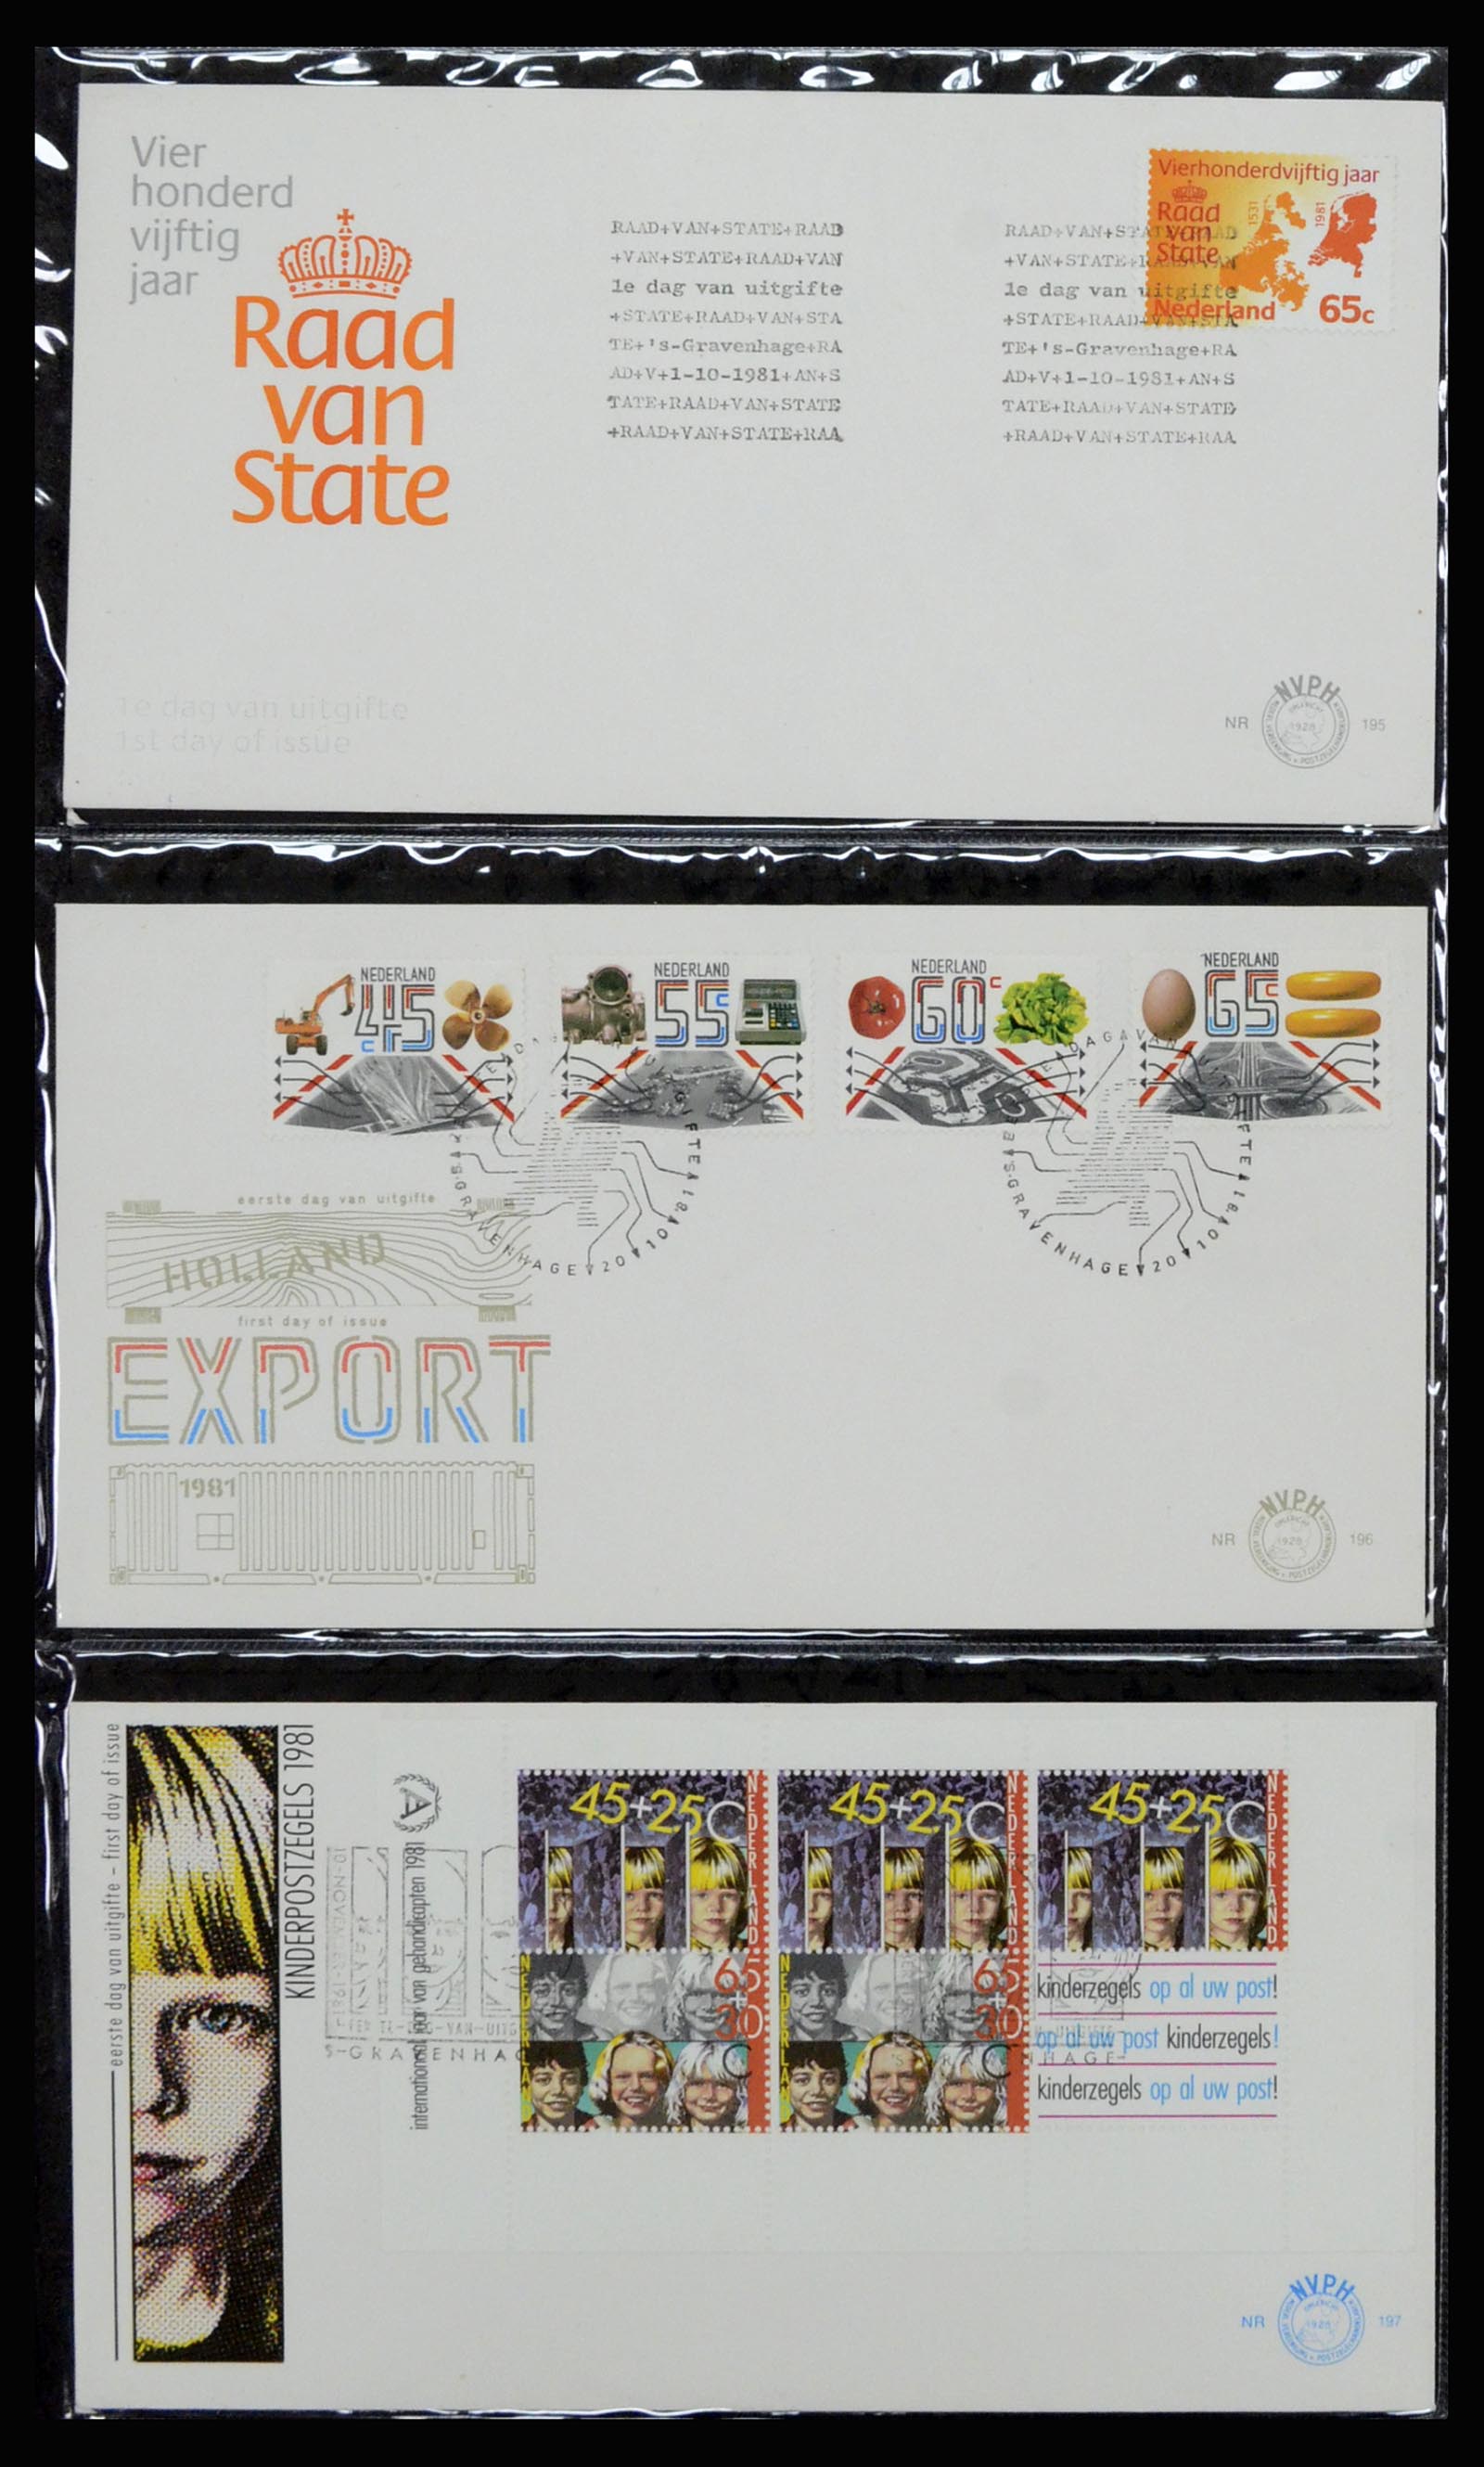 37197 072 - Stamp collection 37197 Netherlands FDC's 1950-2004.